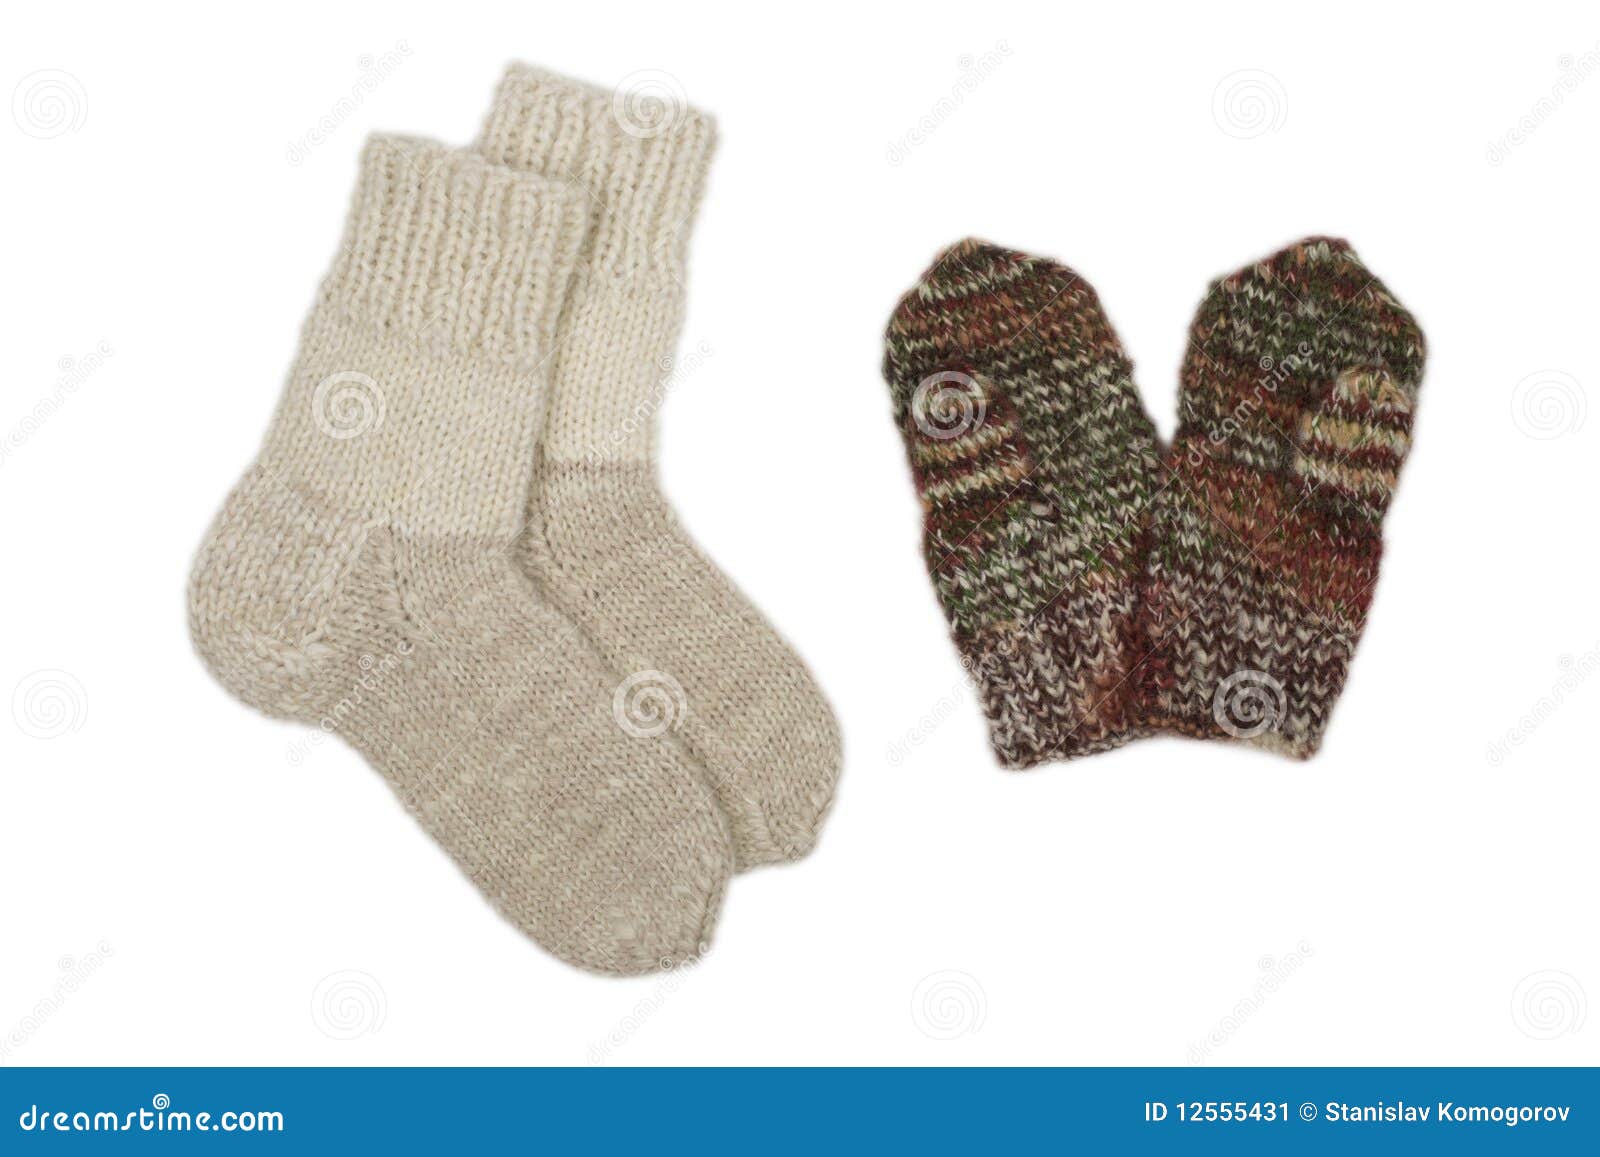 Socks and mittens stock image. Image of hobbies, sewing - 12555431